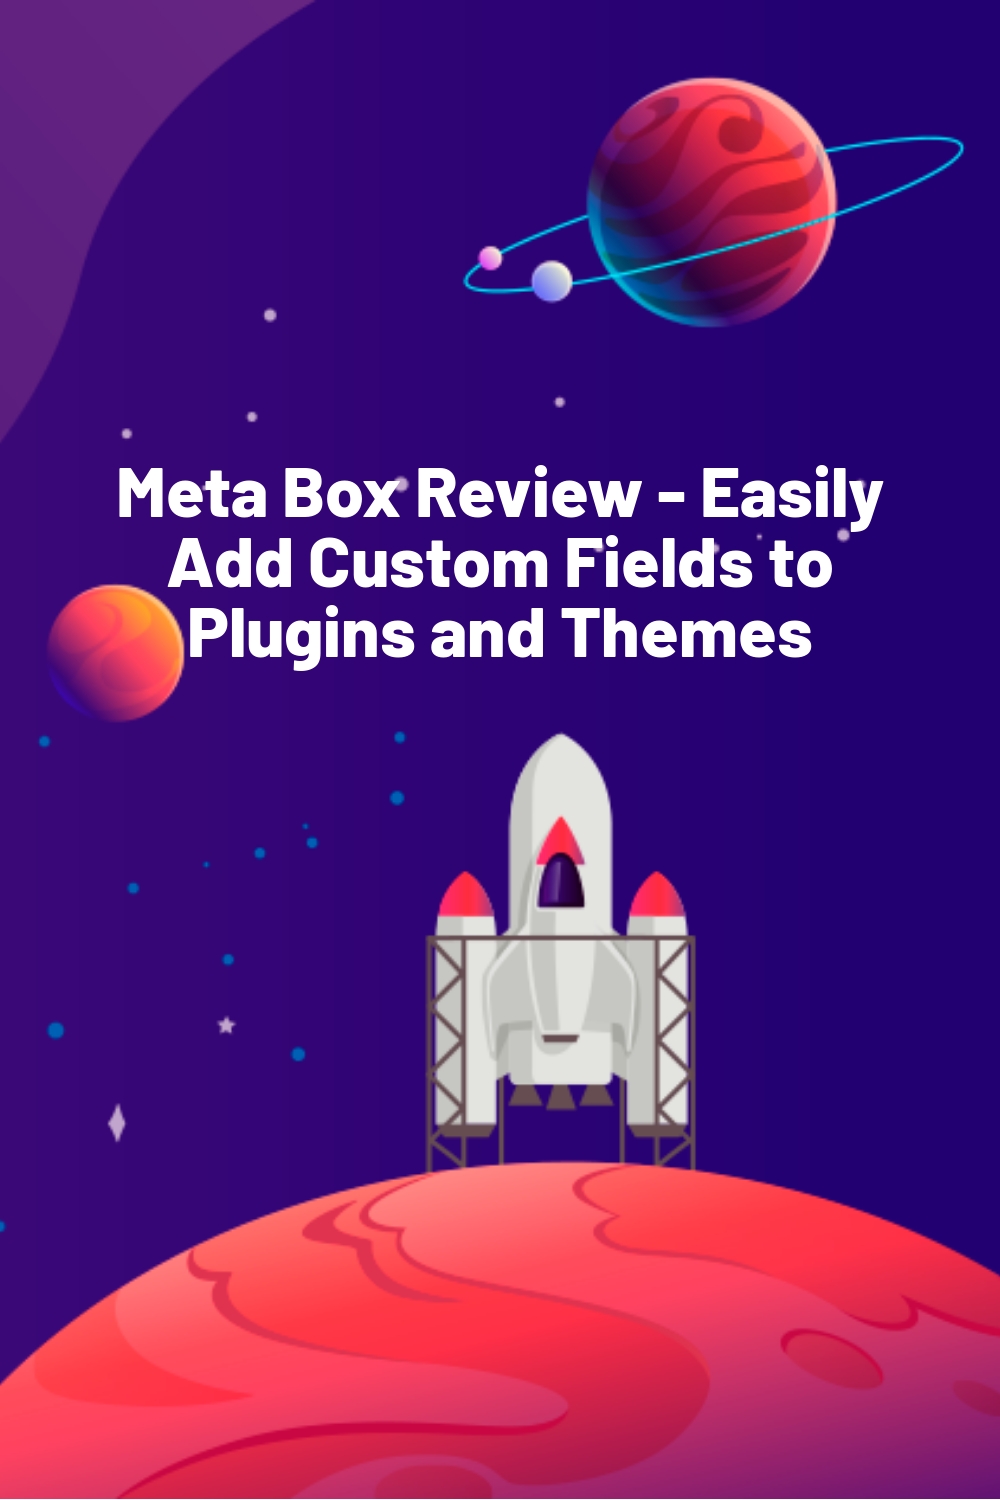 Meta Box Review – Easily Add Custom Fields to Plugins and Themes